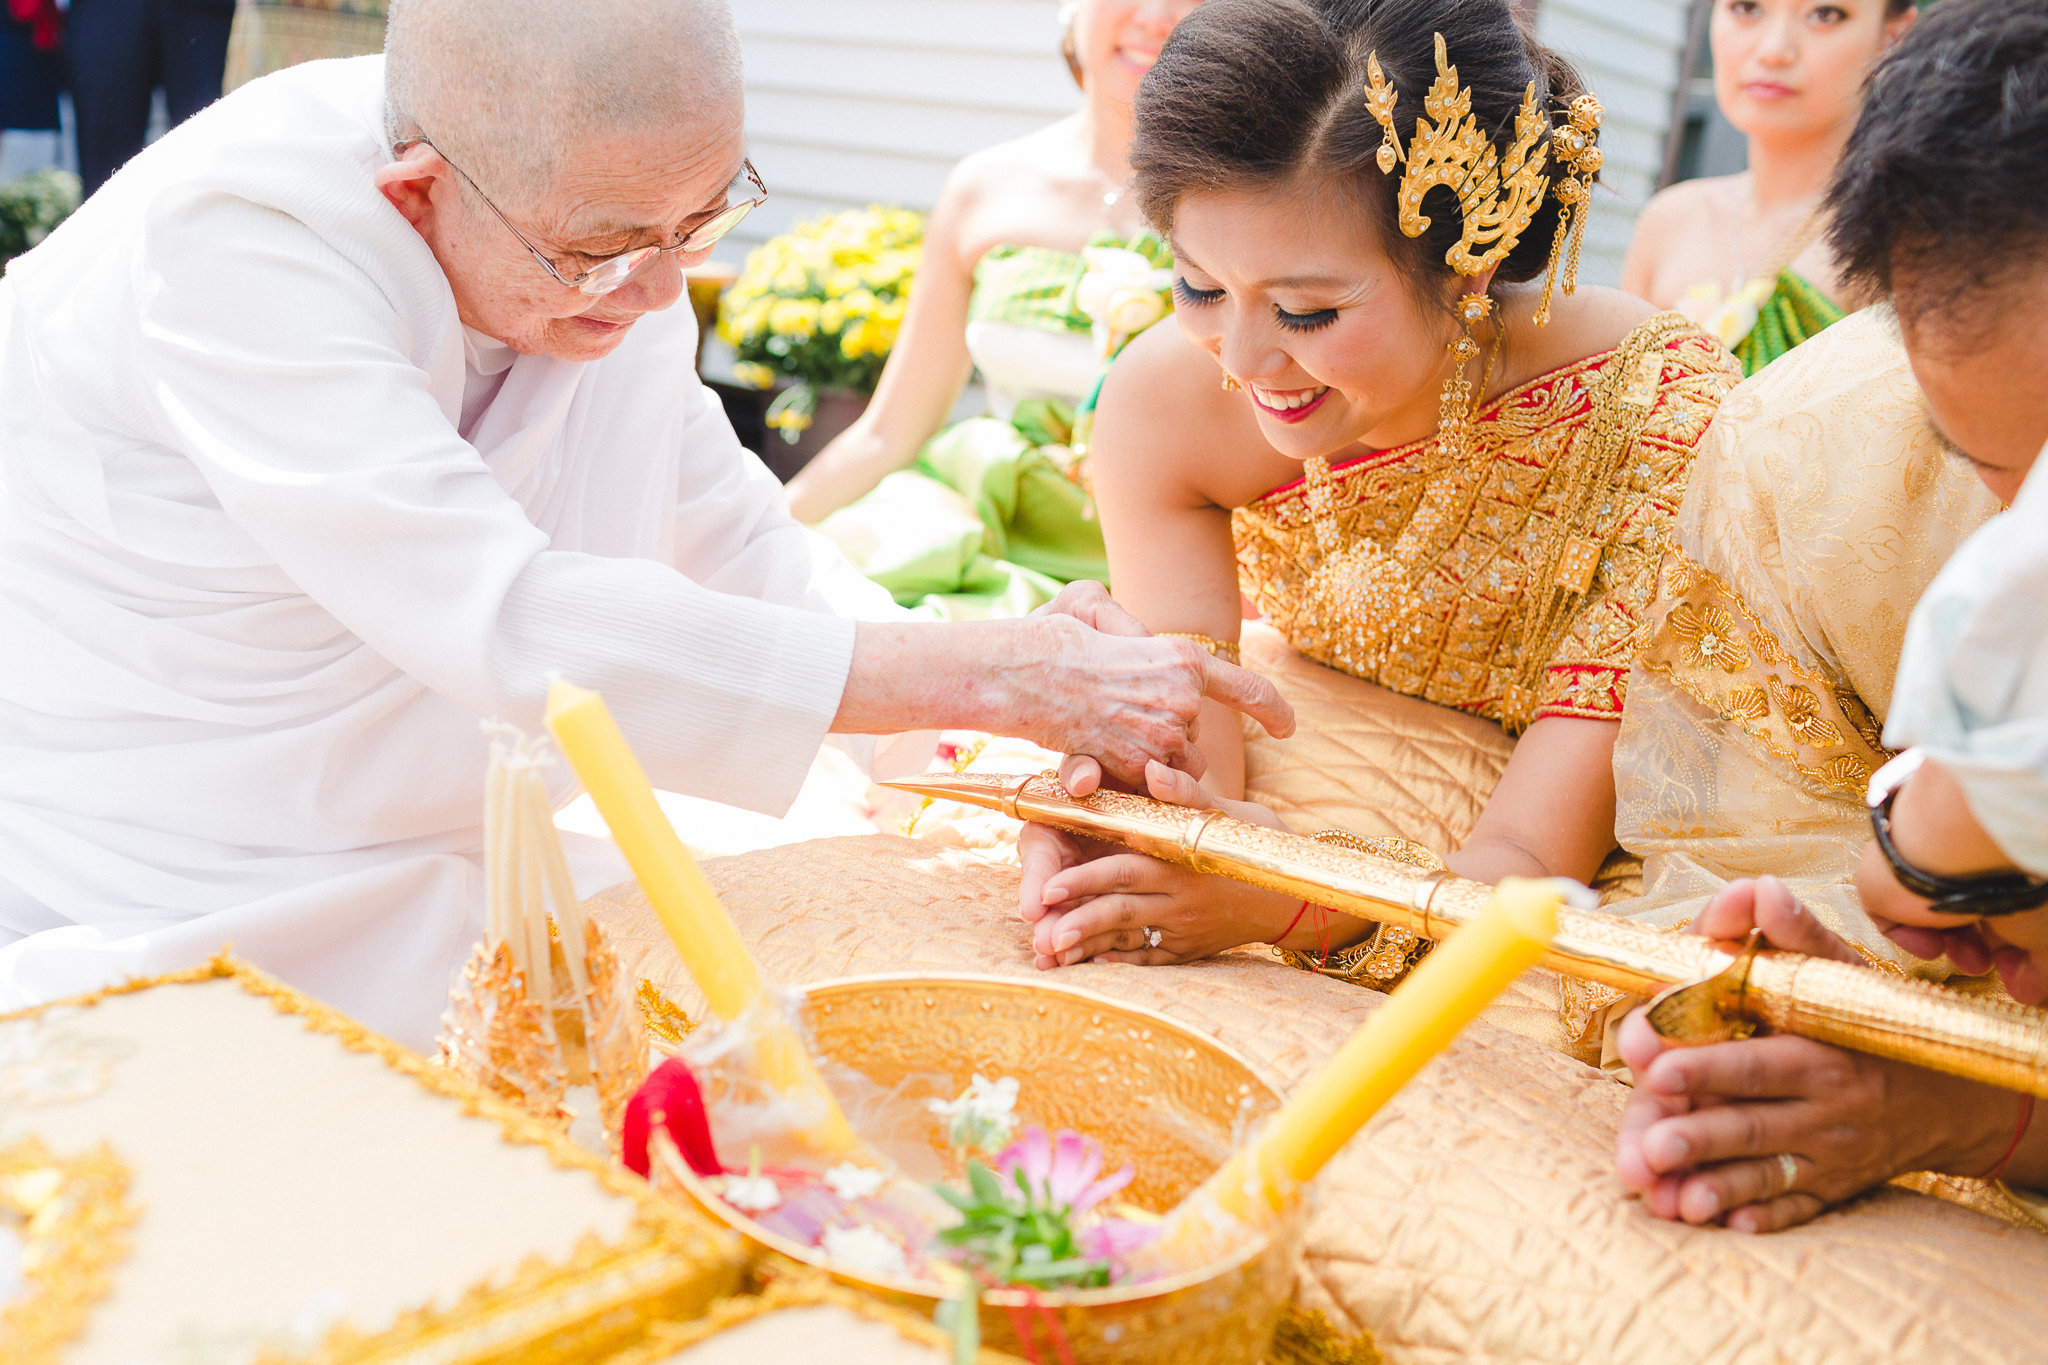 photographe-montreal-mariage-culturel-traditionnel-cambodgien-lisa-renault-photographie-traditional-cultural-cambodian-wedding-59